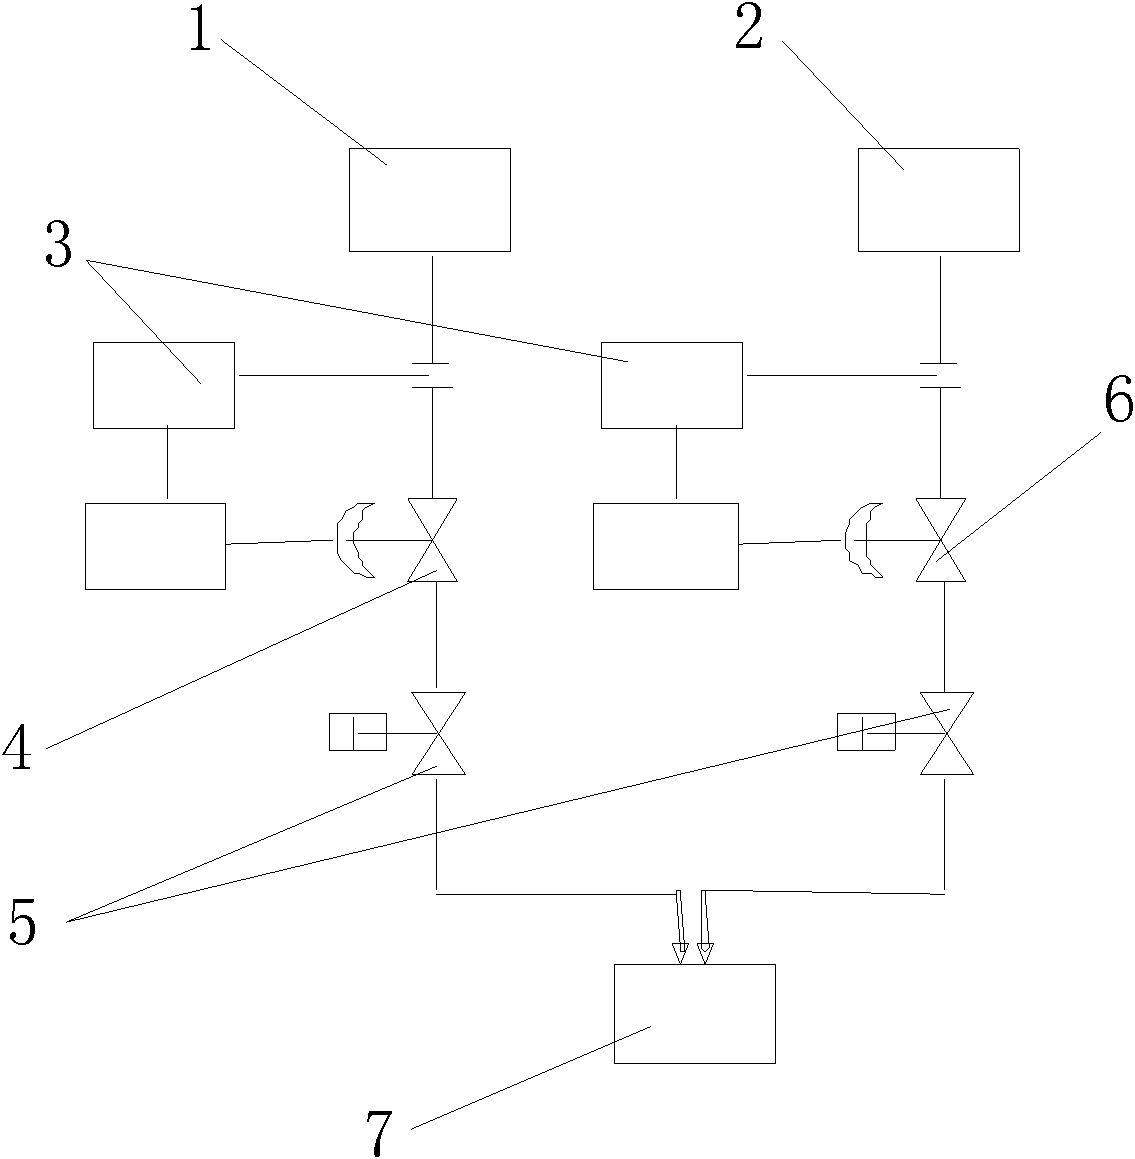 Flow control method of combustion system